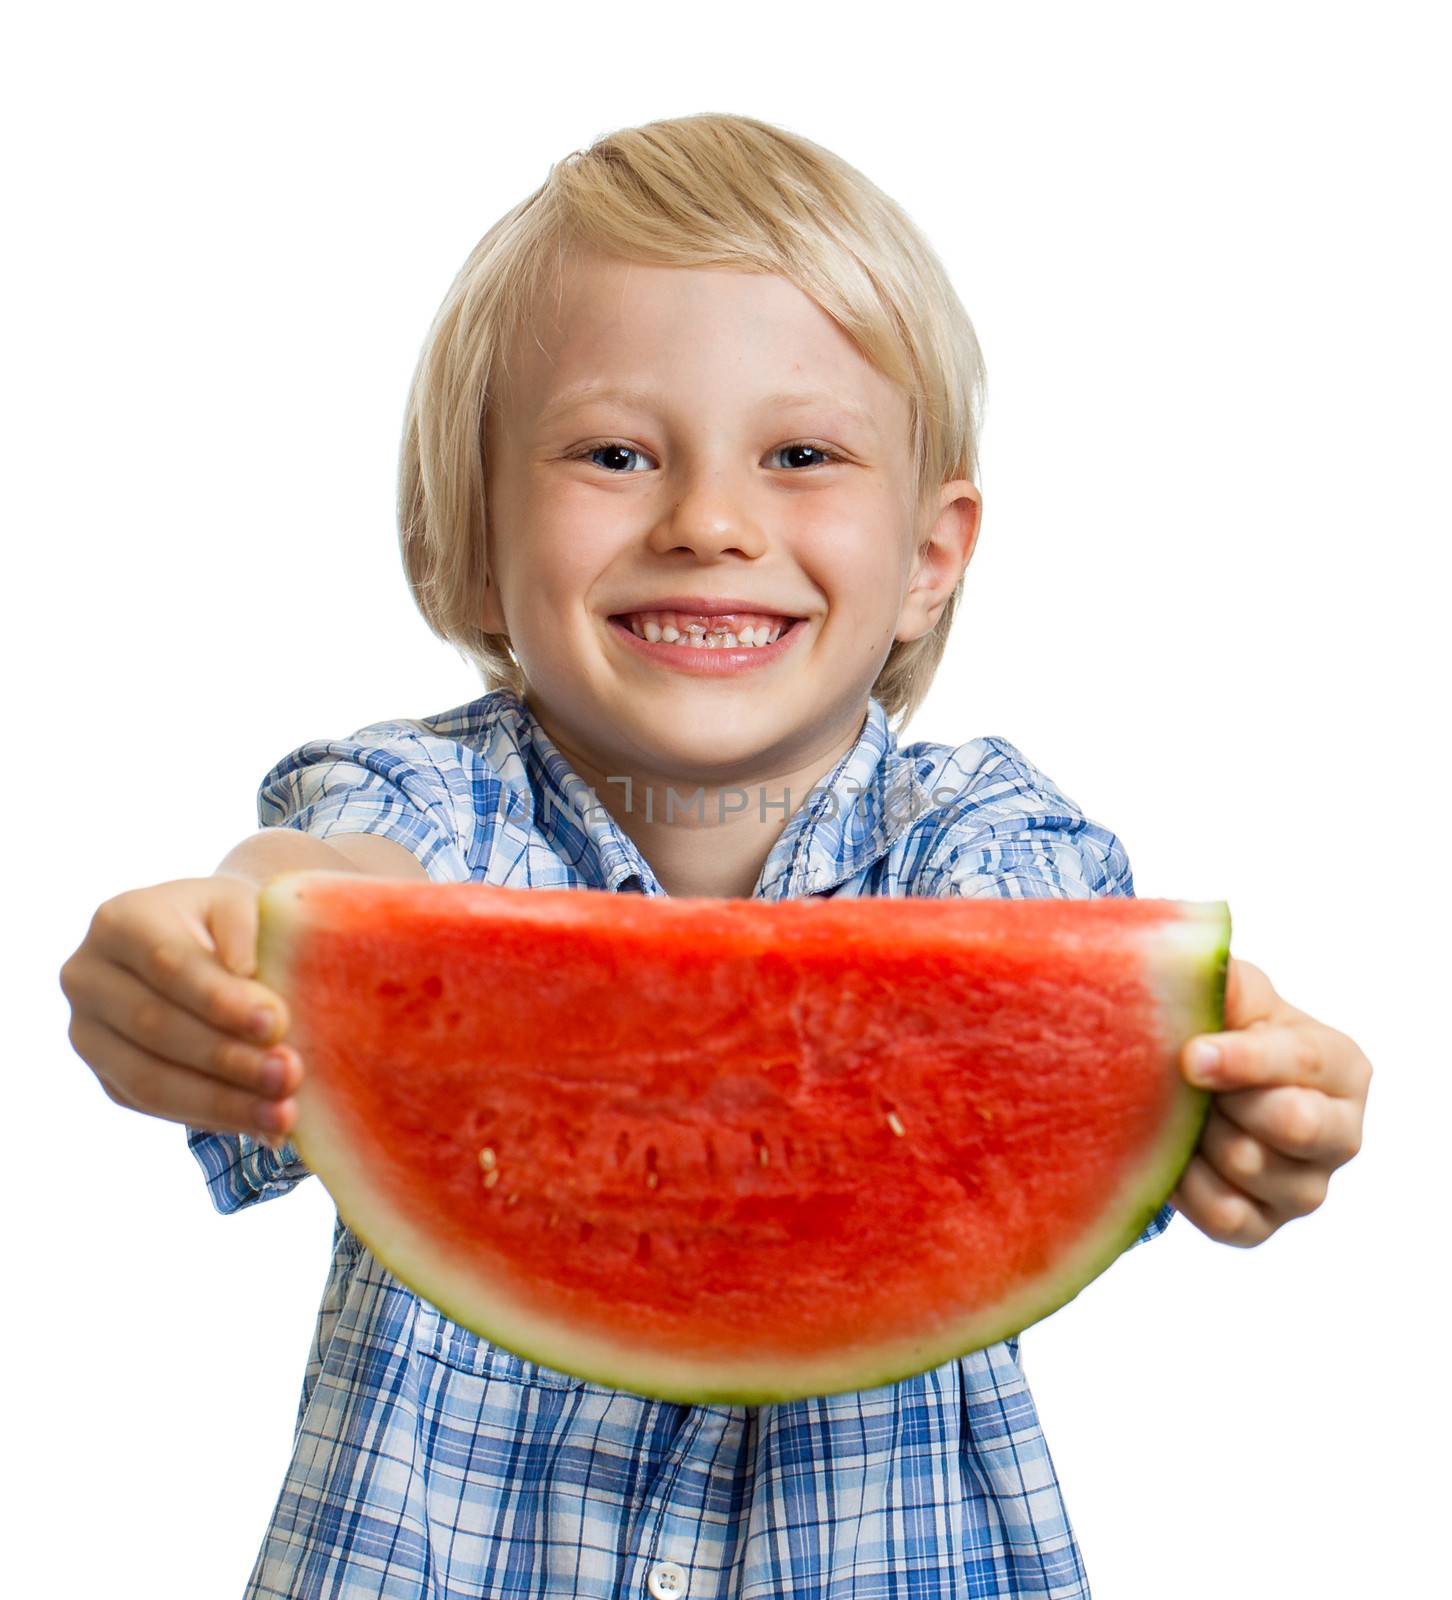 Close-up of cute happy smiling boy holding out a big juicy slice of watermelon. Isolated on white.